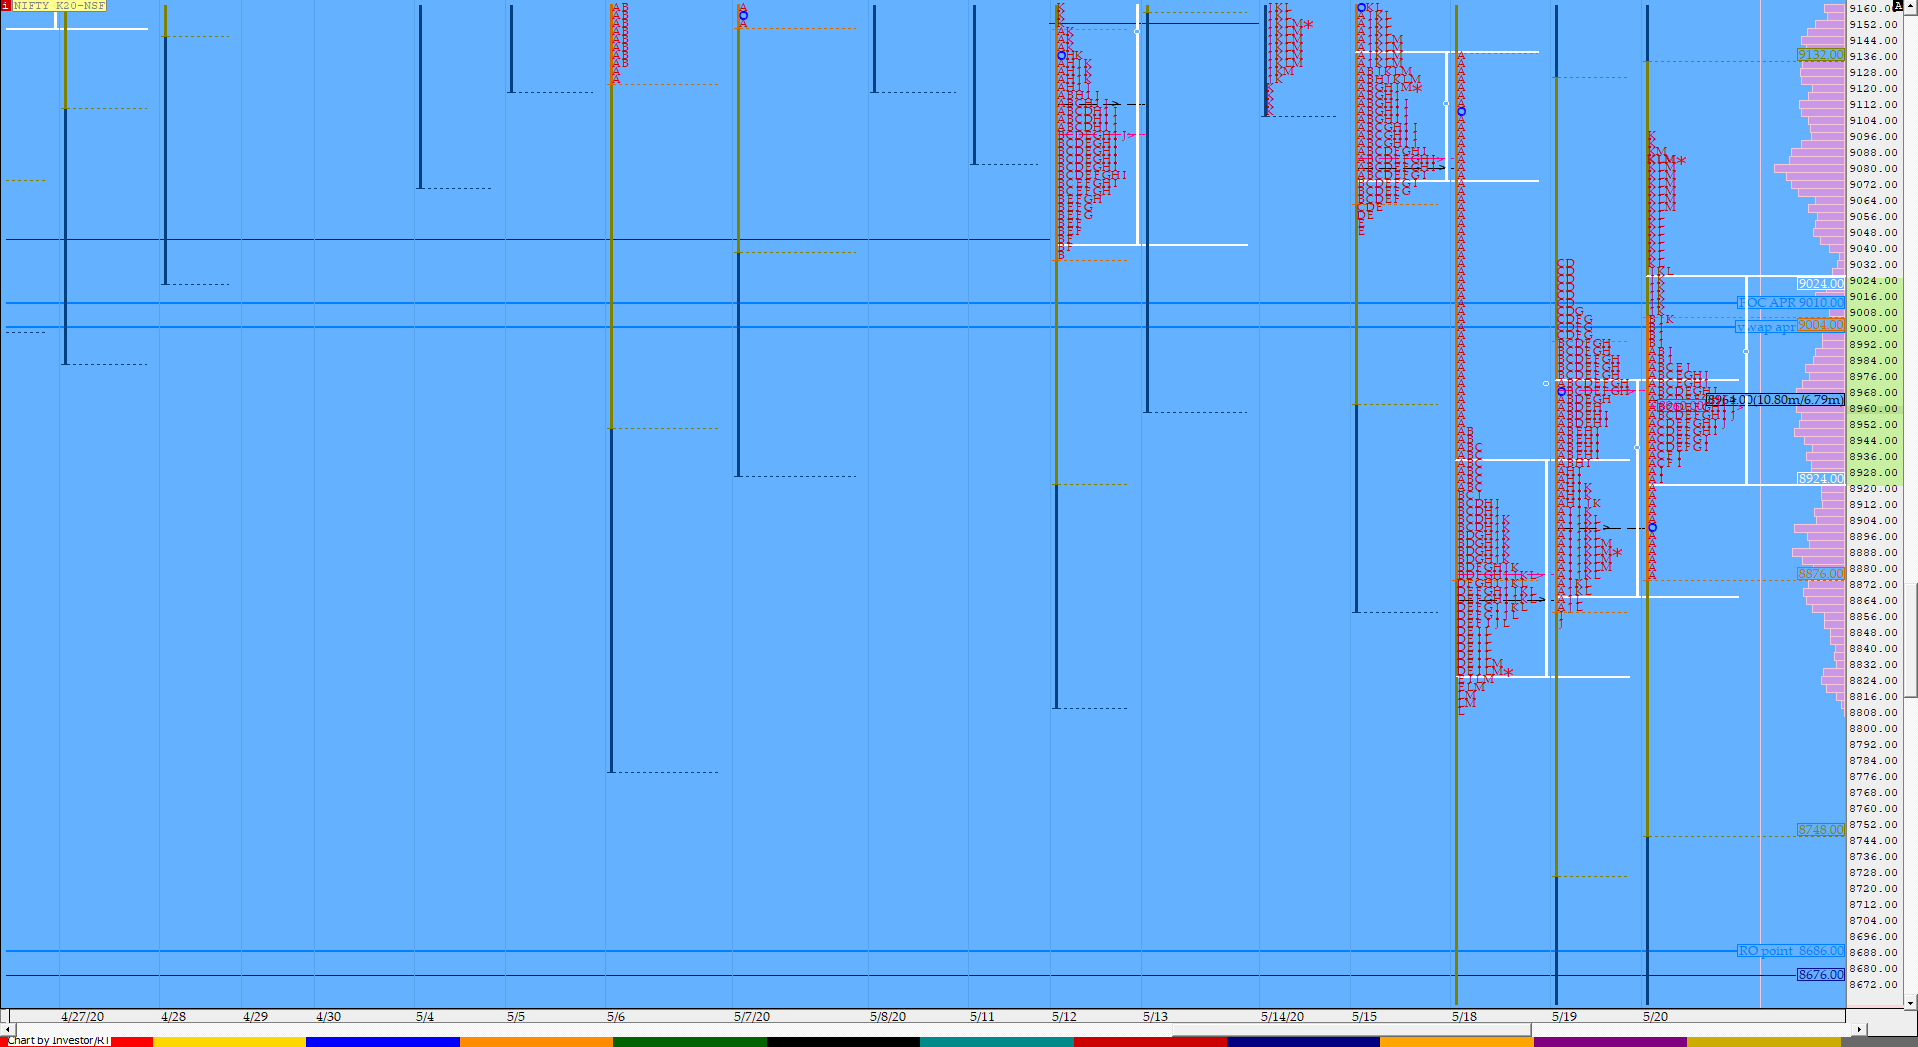 Nf Compo1 13 Market Profile Analysis Dated 20Th May 2020 Banknifty Futures, Charts, Day Trading, Intraday Trading, Intraday Trading Strategies, Market Profile, Market Profile Trading Strategies, Nifty Futures, Order Flow Analysis, Support And Resistance, Technical Analysis, Trading Strategies, Volume Profile Trading